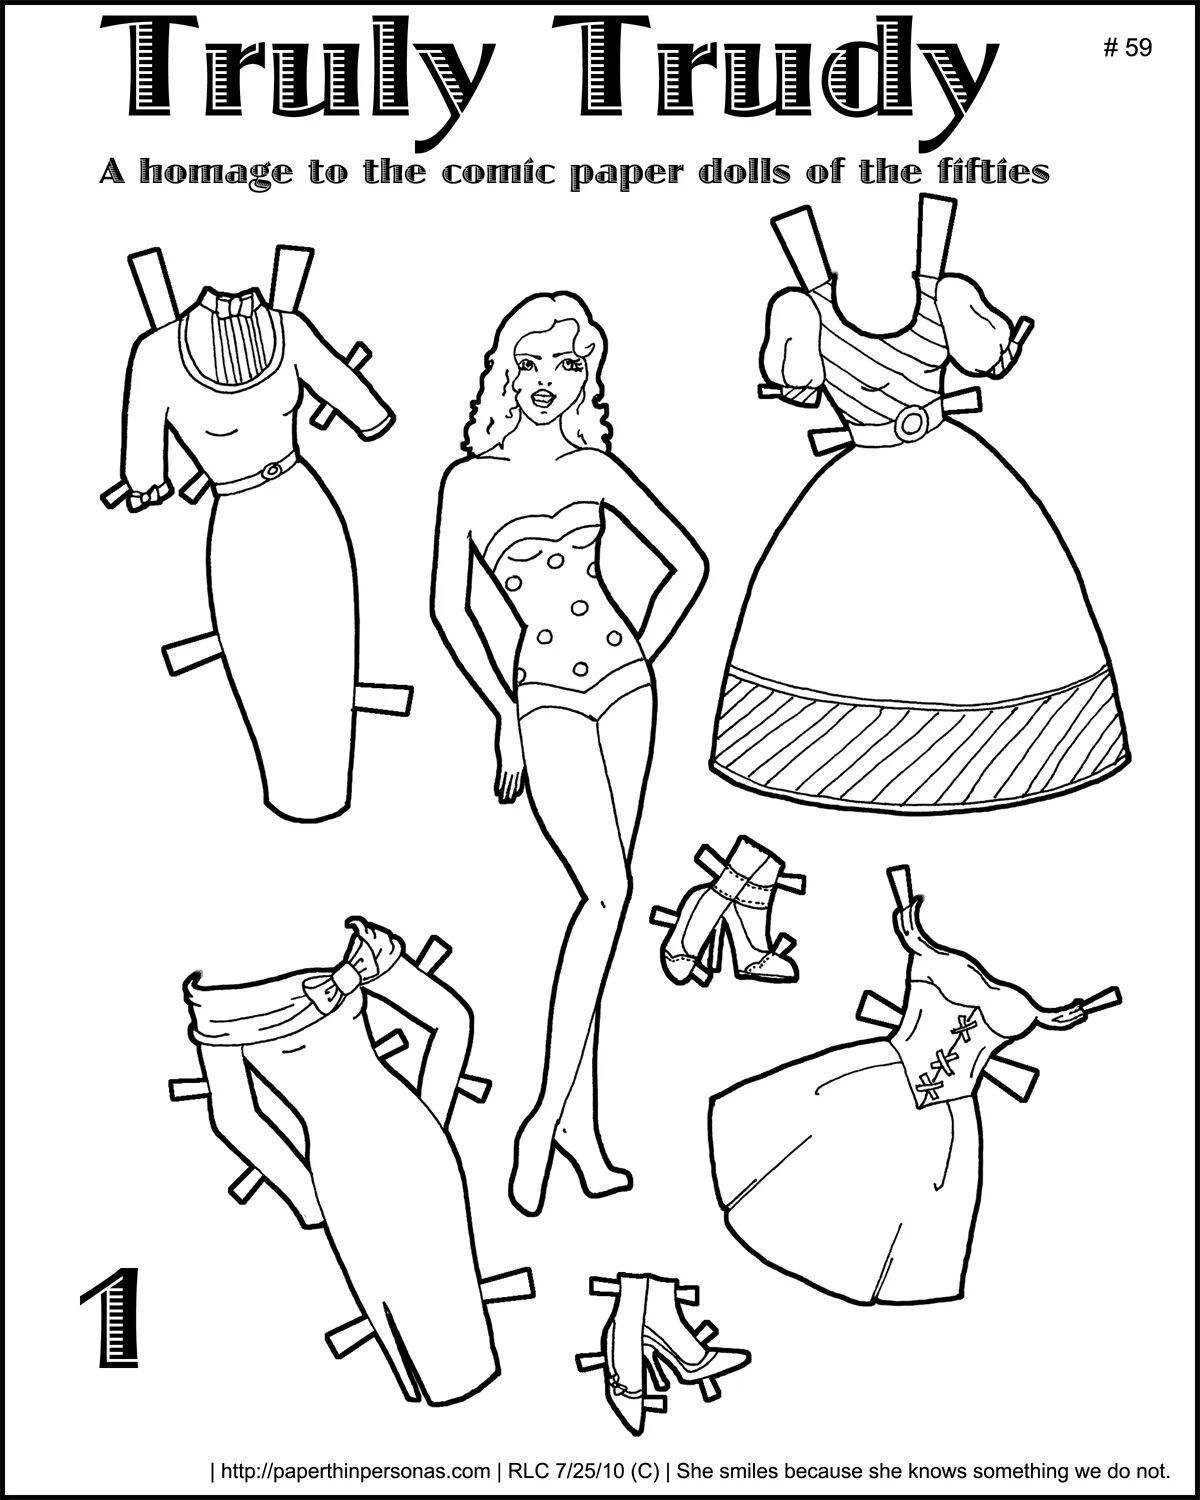 Charming barbie outfit coloring book